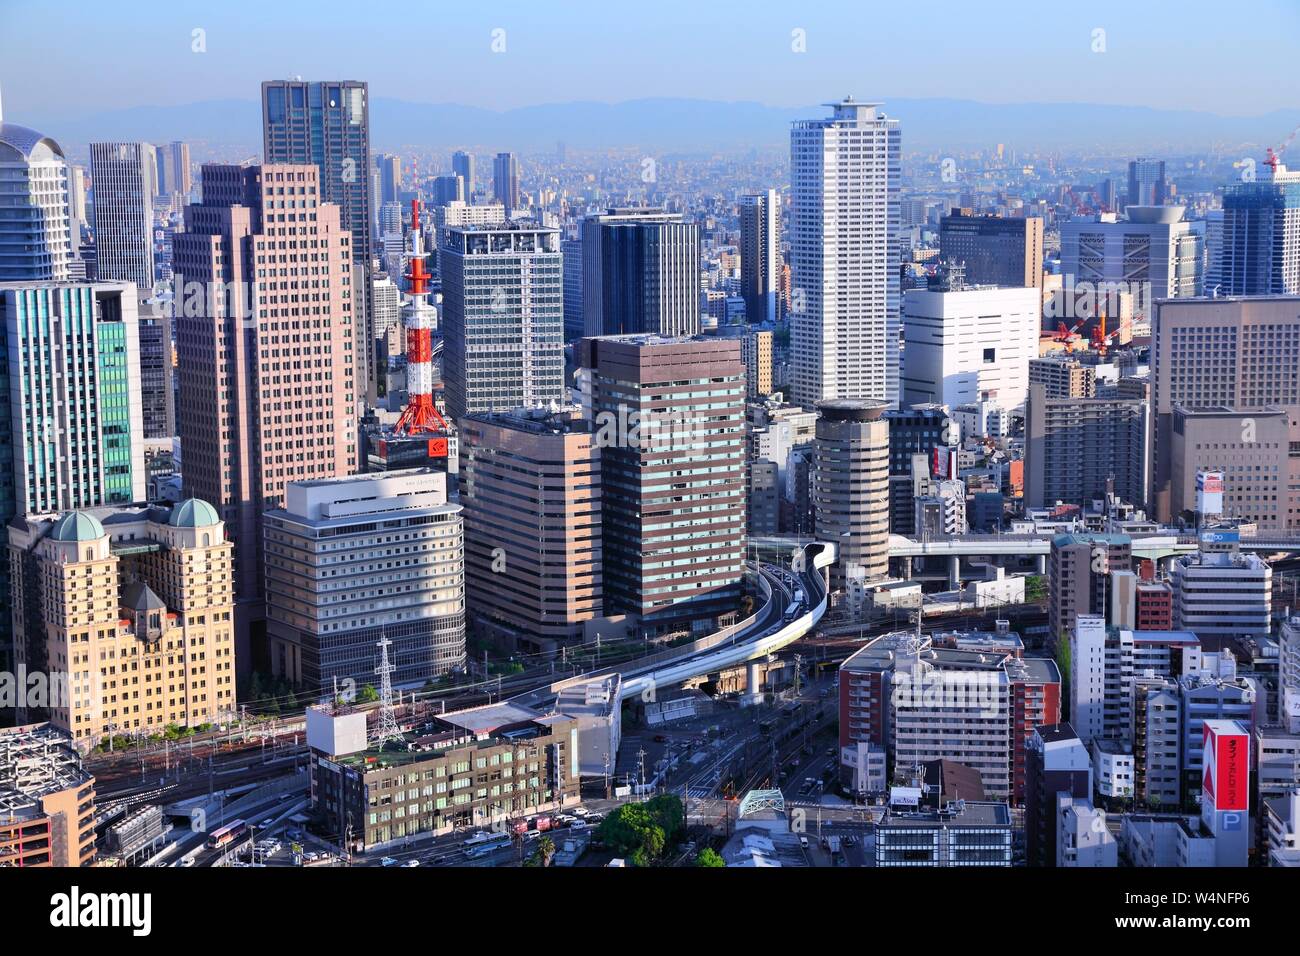 OSAKA, JAPAN - APRIL 27, 2012: Cityscape view in Osaka, Japan. Osaka is the 3rd largest city in Japan (2.8 million people) with population of metro ar Stock Photo